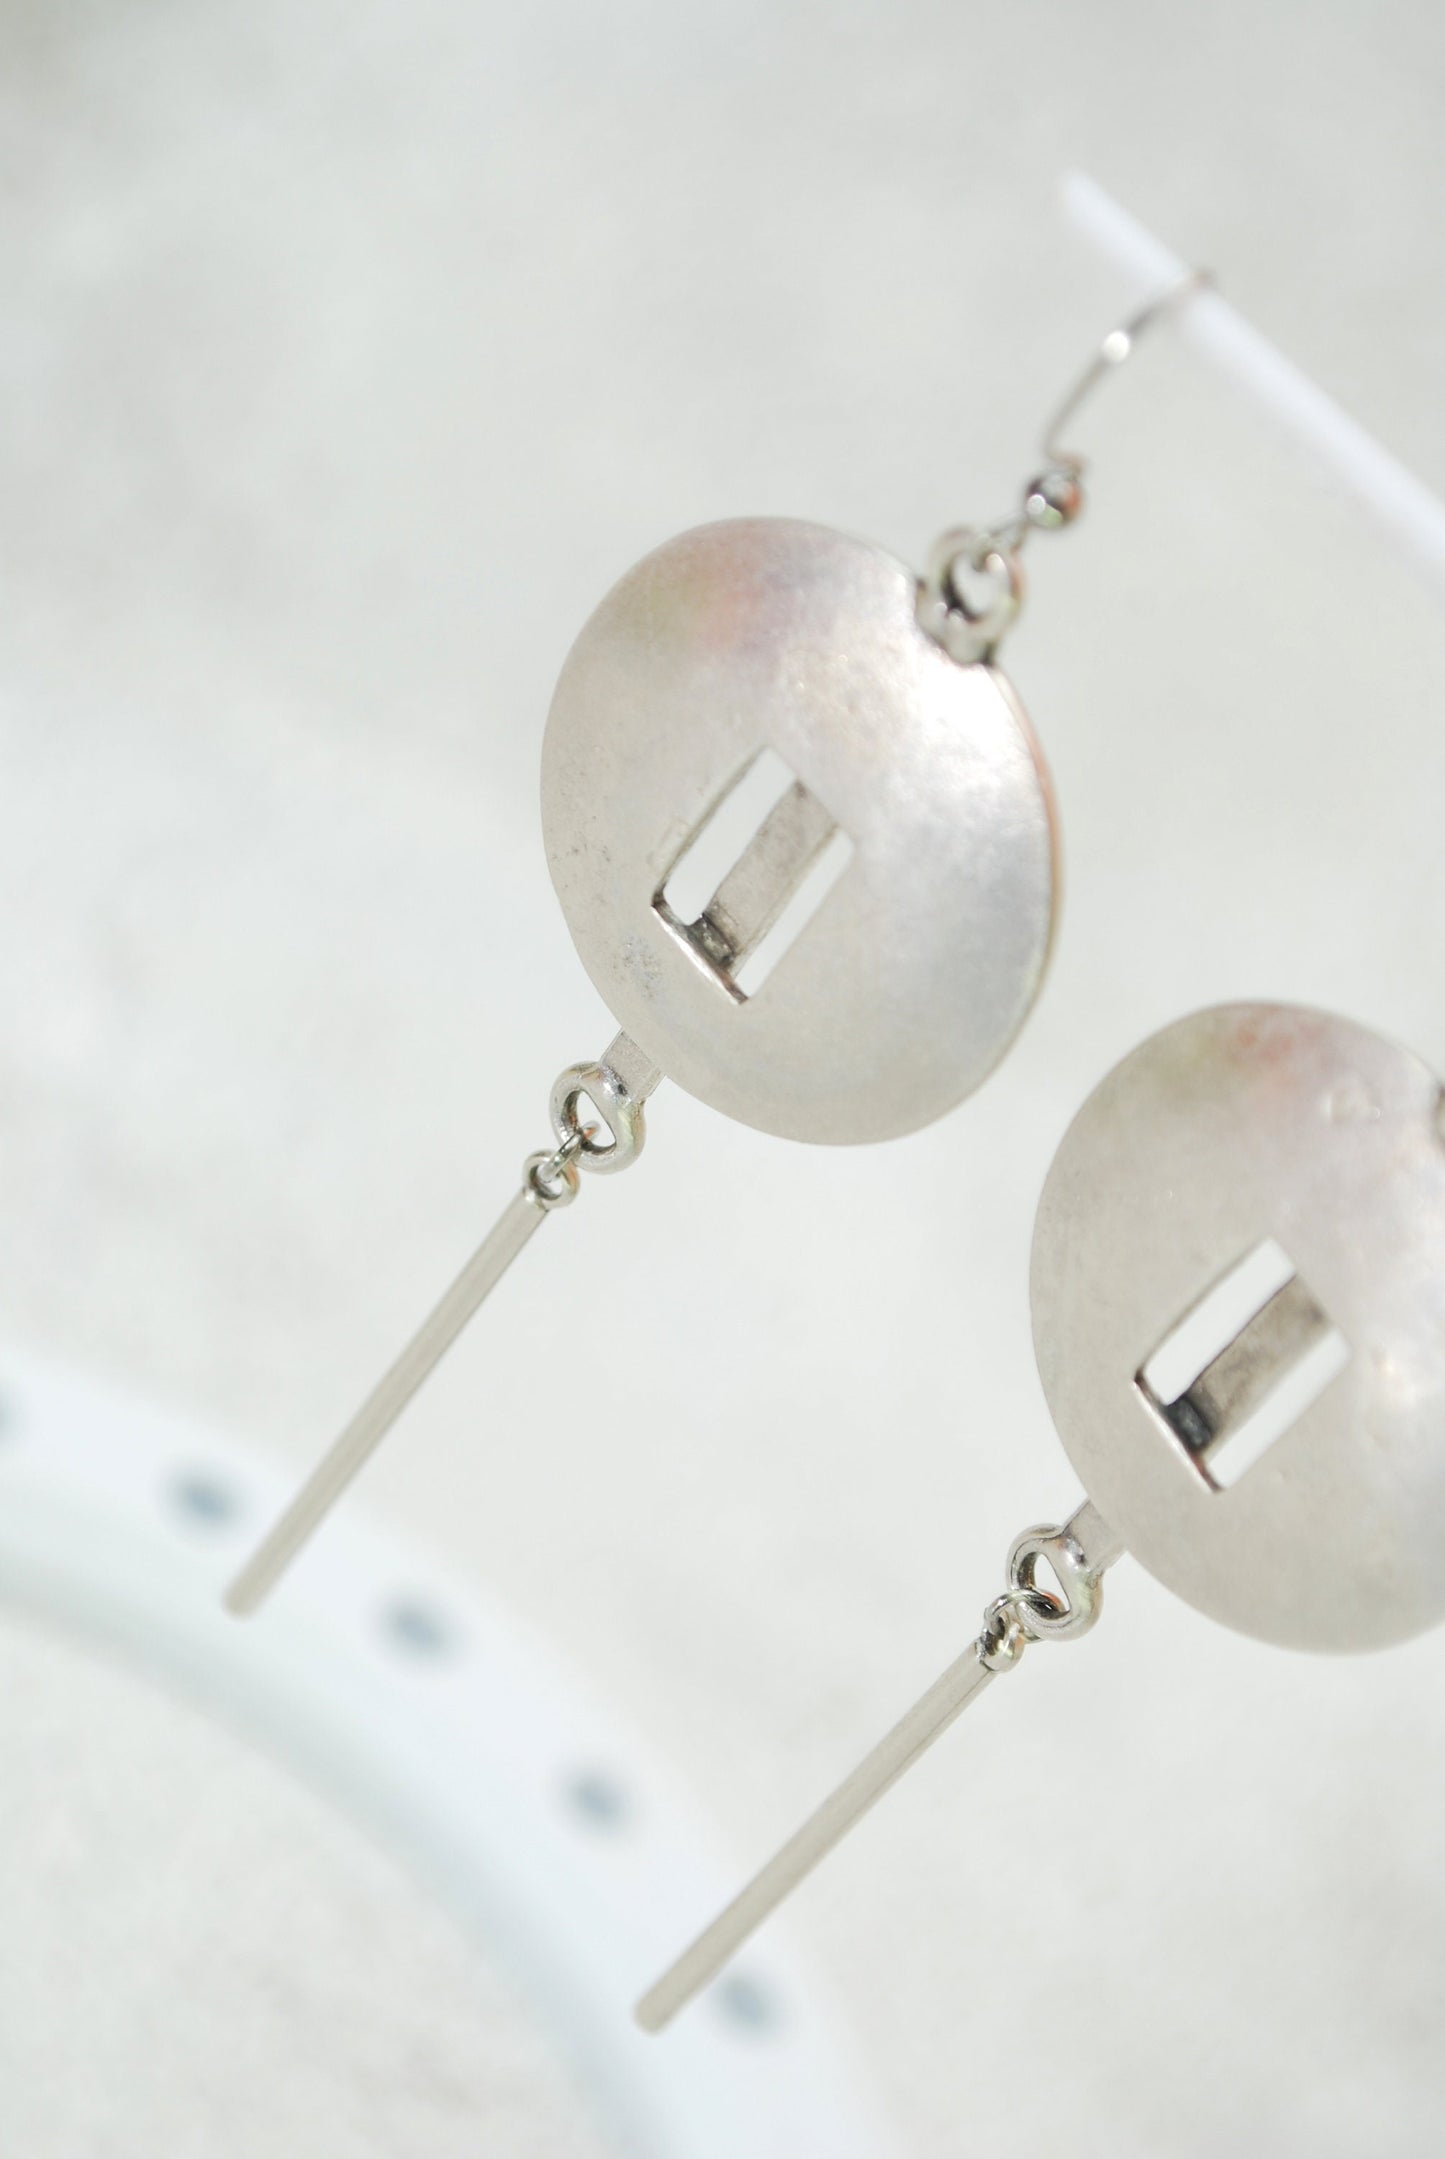 Artisanal Elegance: Limited Edition Antique Silver Abstract Long Earrings, 10cm - 4"